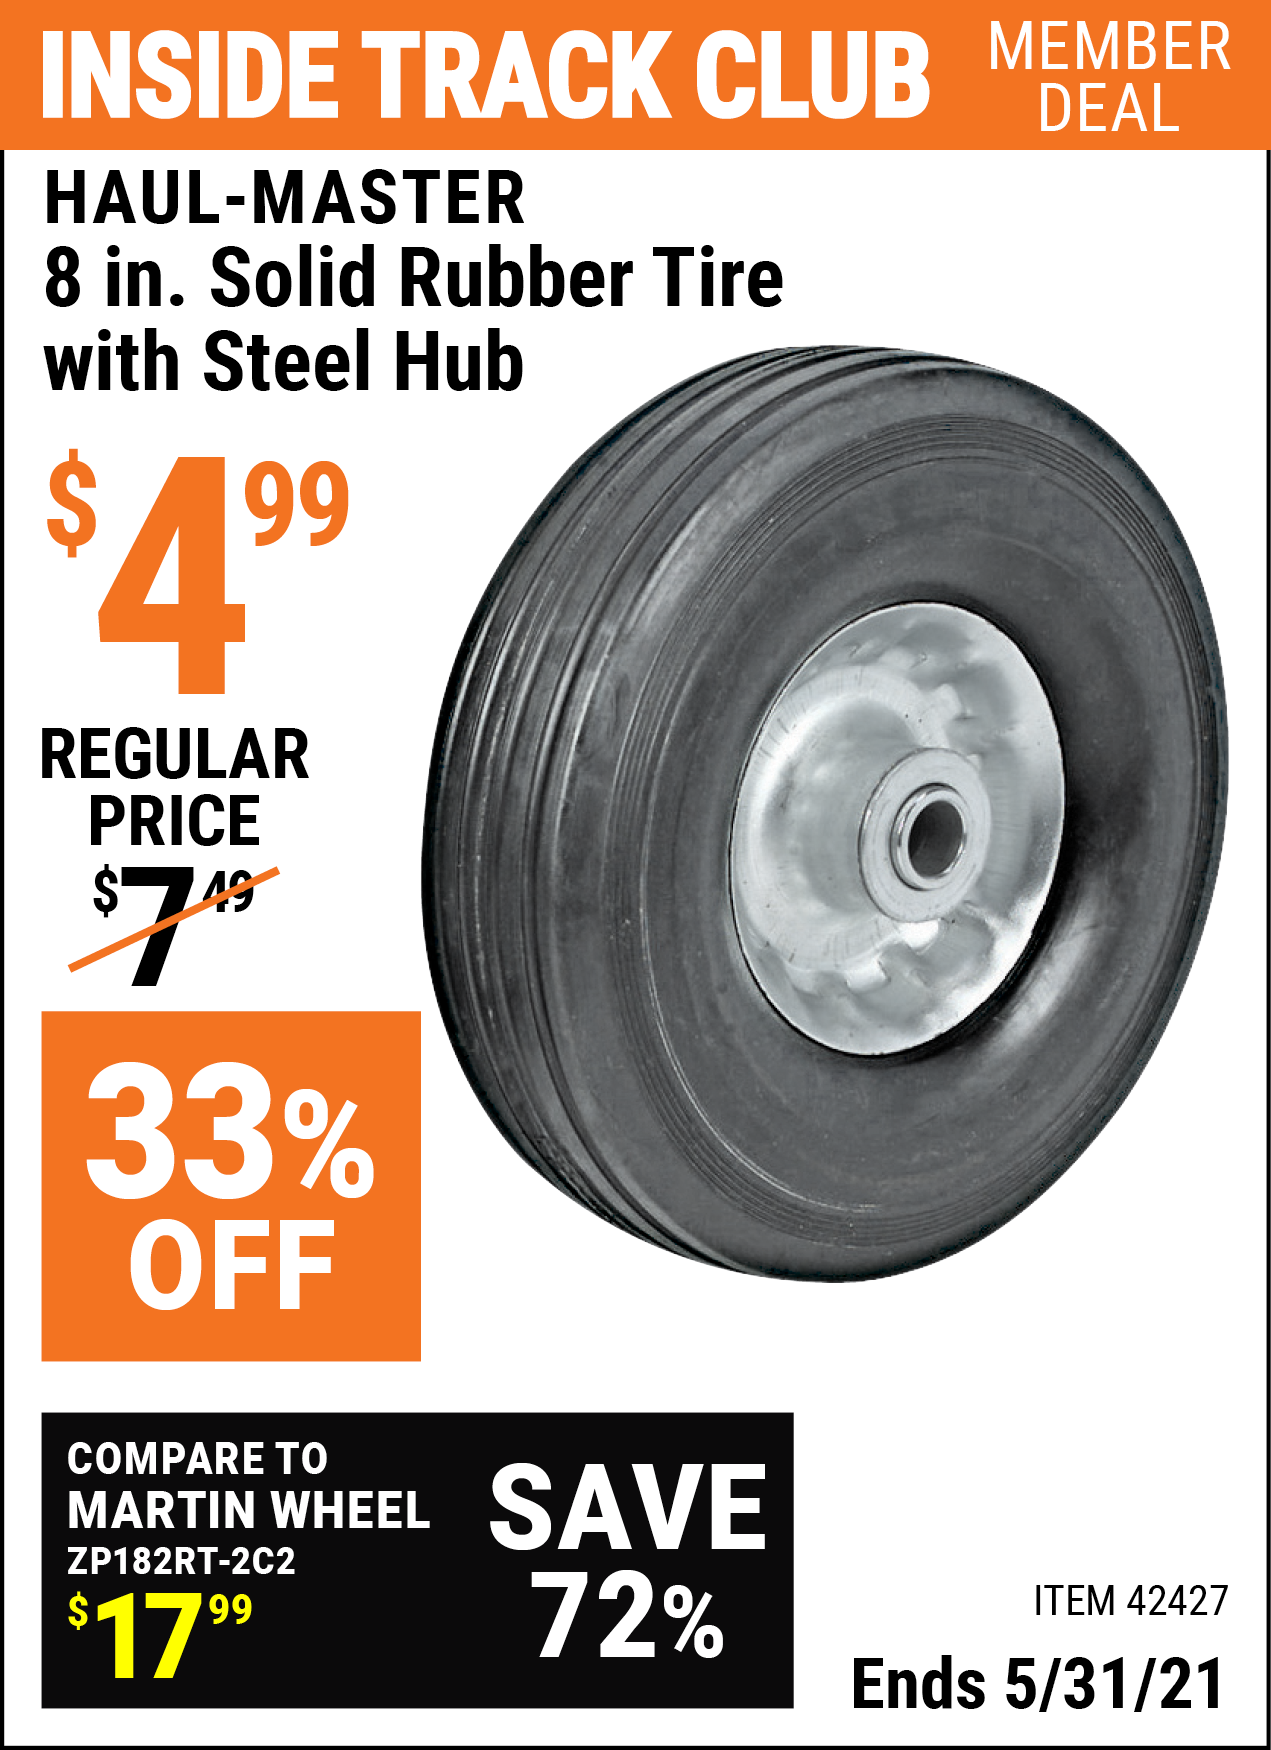 Inside Track Club members can buy the HAUL-MASTER 8 in. Heavy Duty Solid Rubber Tire with Steel Hub (Item 42427) for $4.99, valid through 5/31/2021.